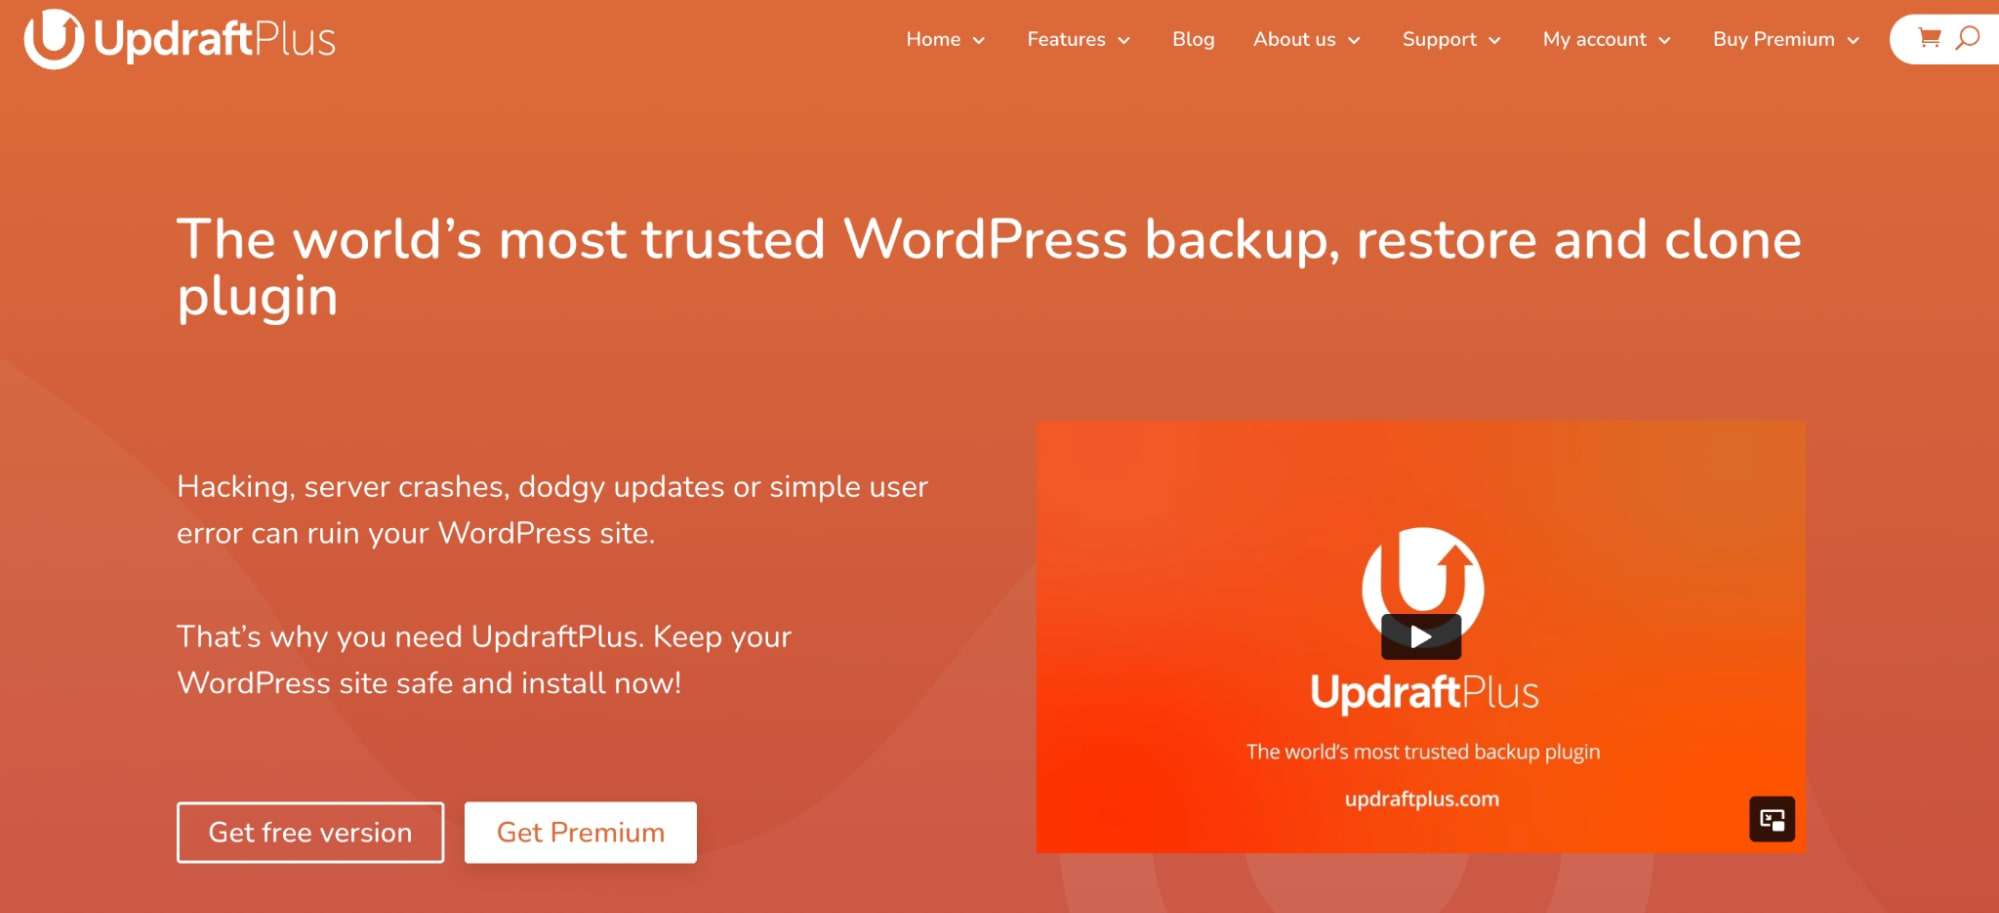 UpdraftPlus is one of the best free WordPress plugins for data backup and restoration.